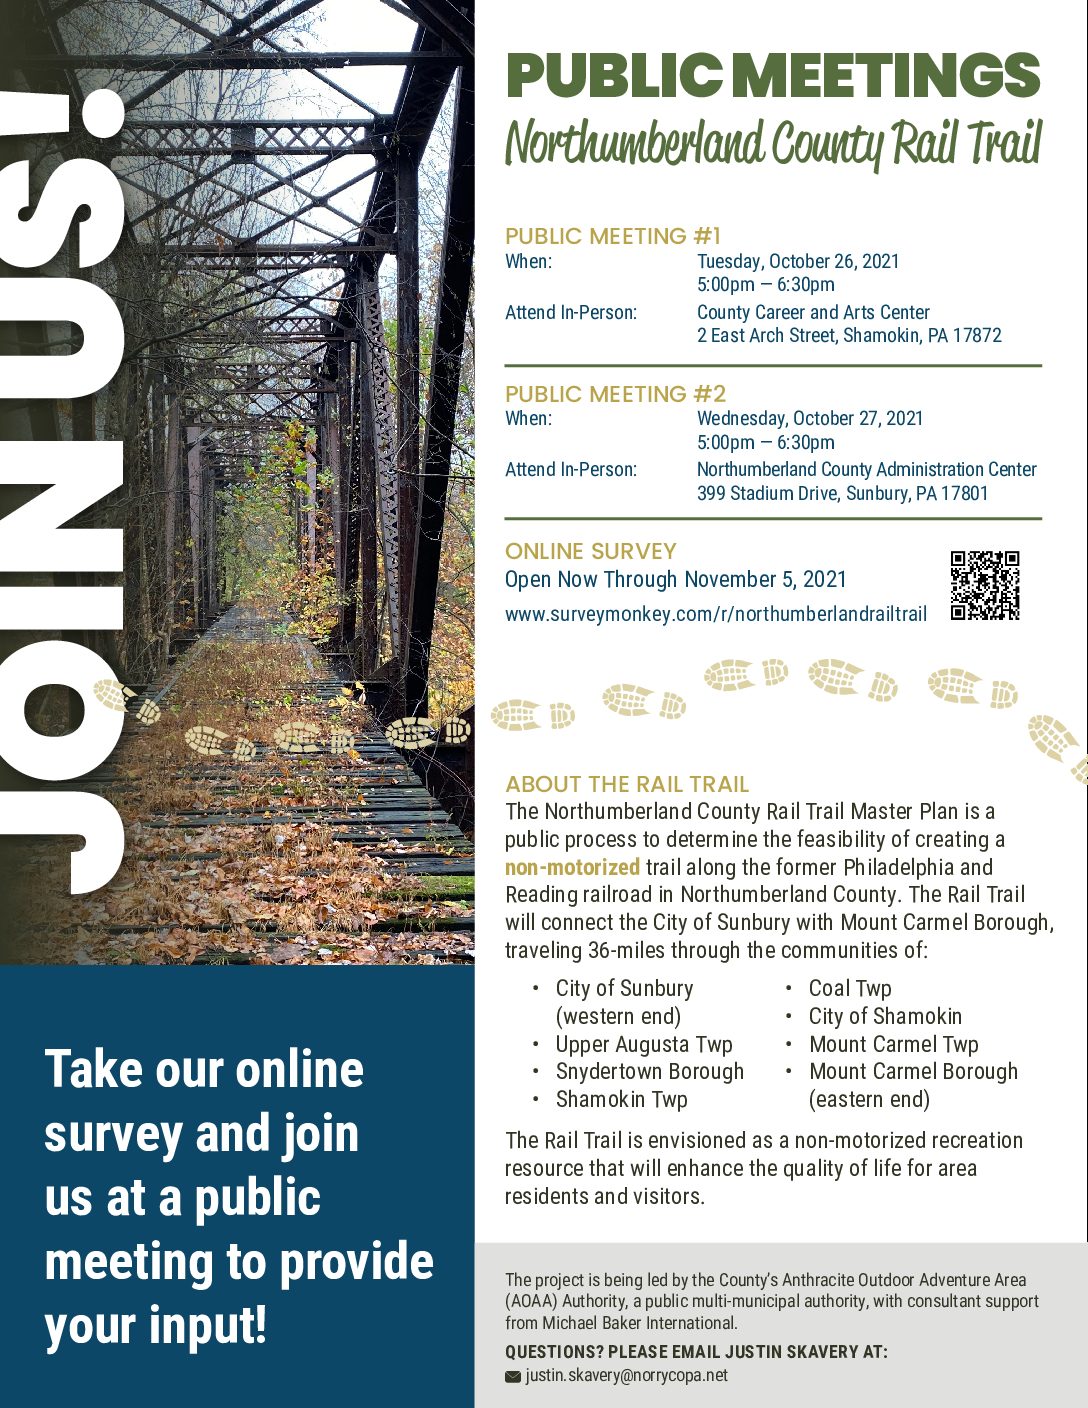 Public Meetings and Online Survey Planned to Gather Community Input for Proposed Northumberland County Rail Trail.